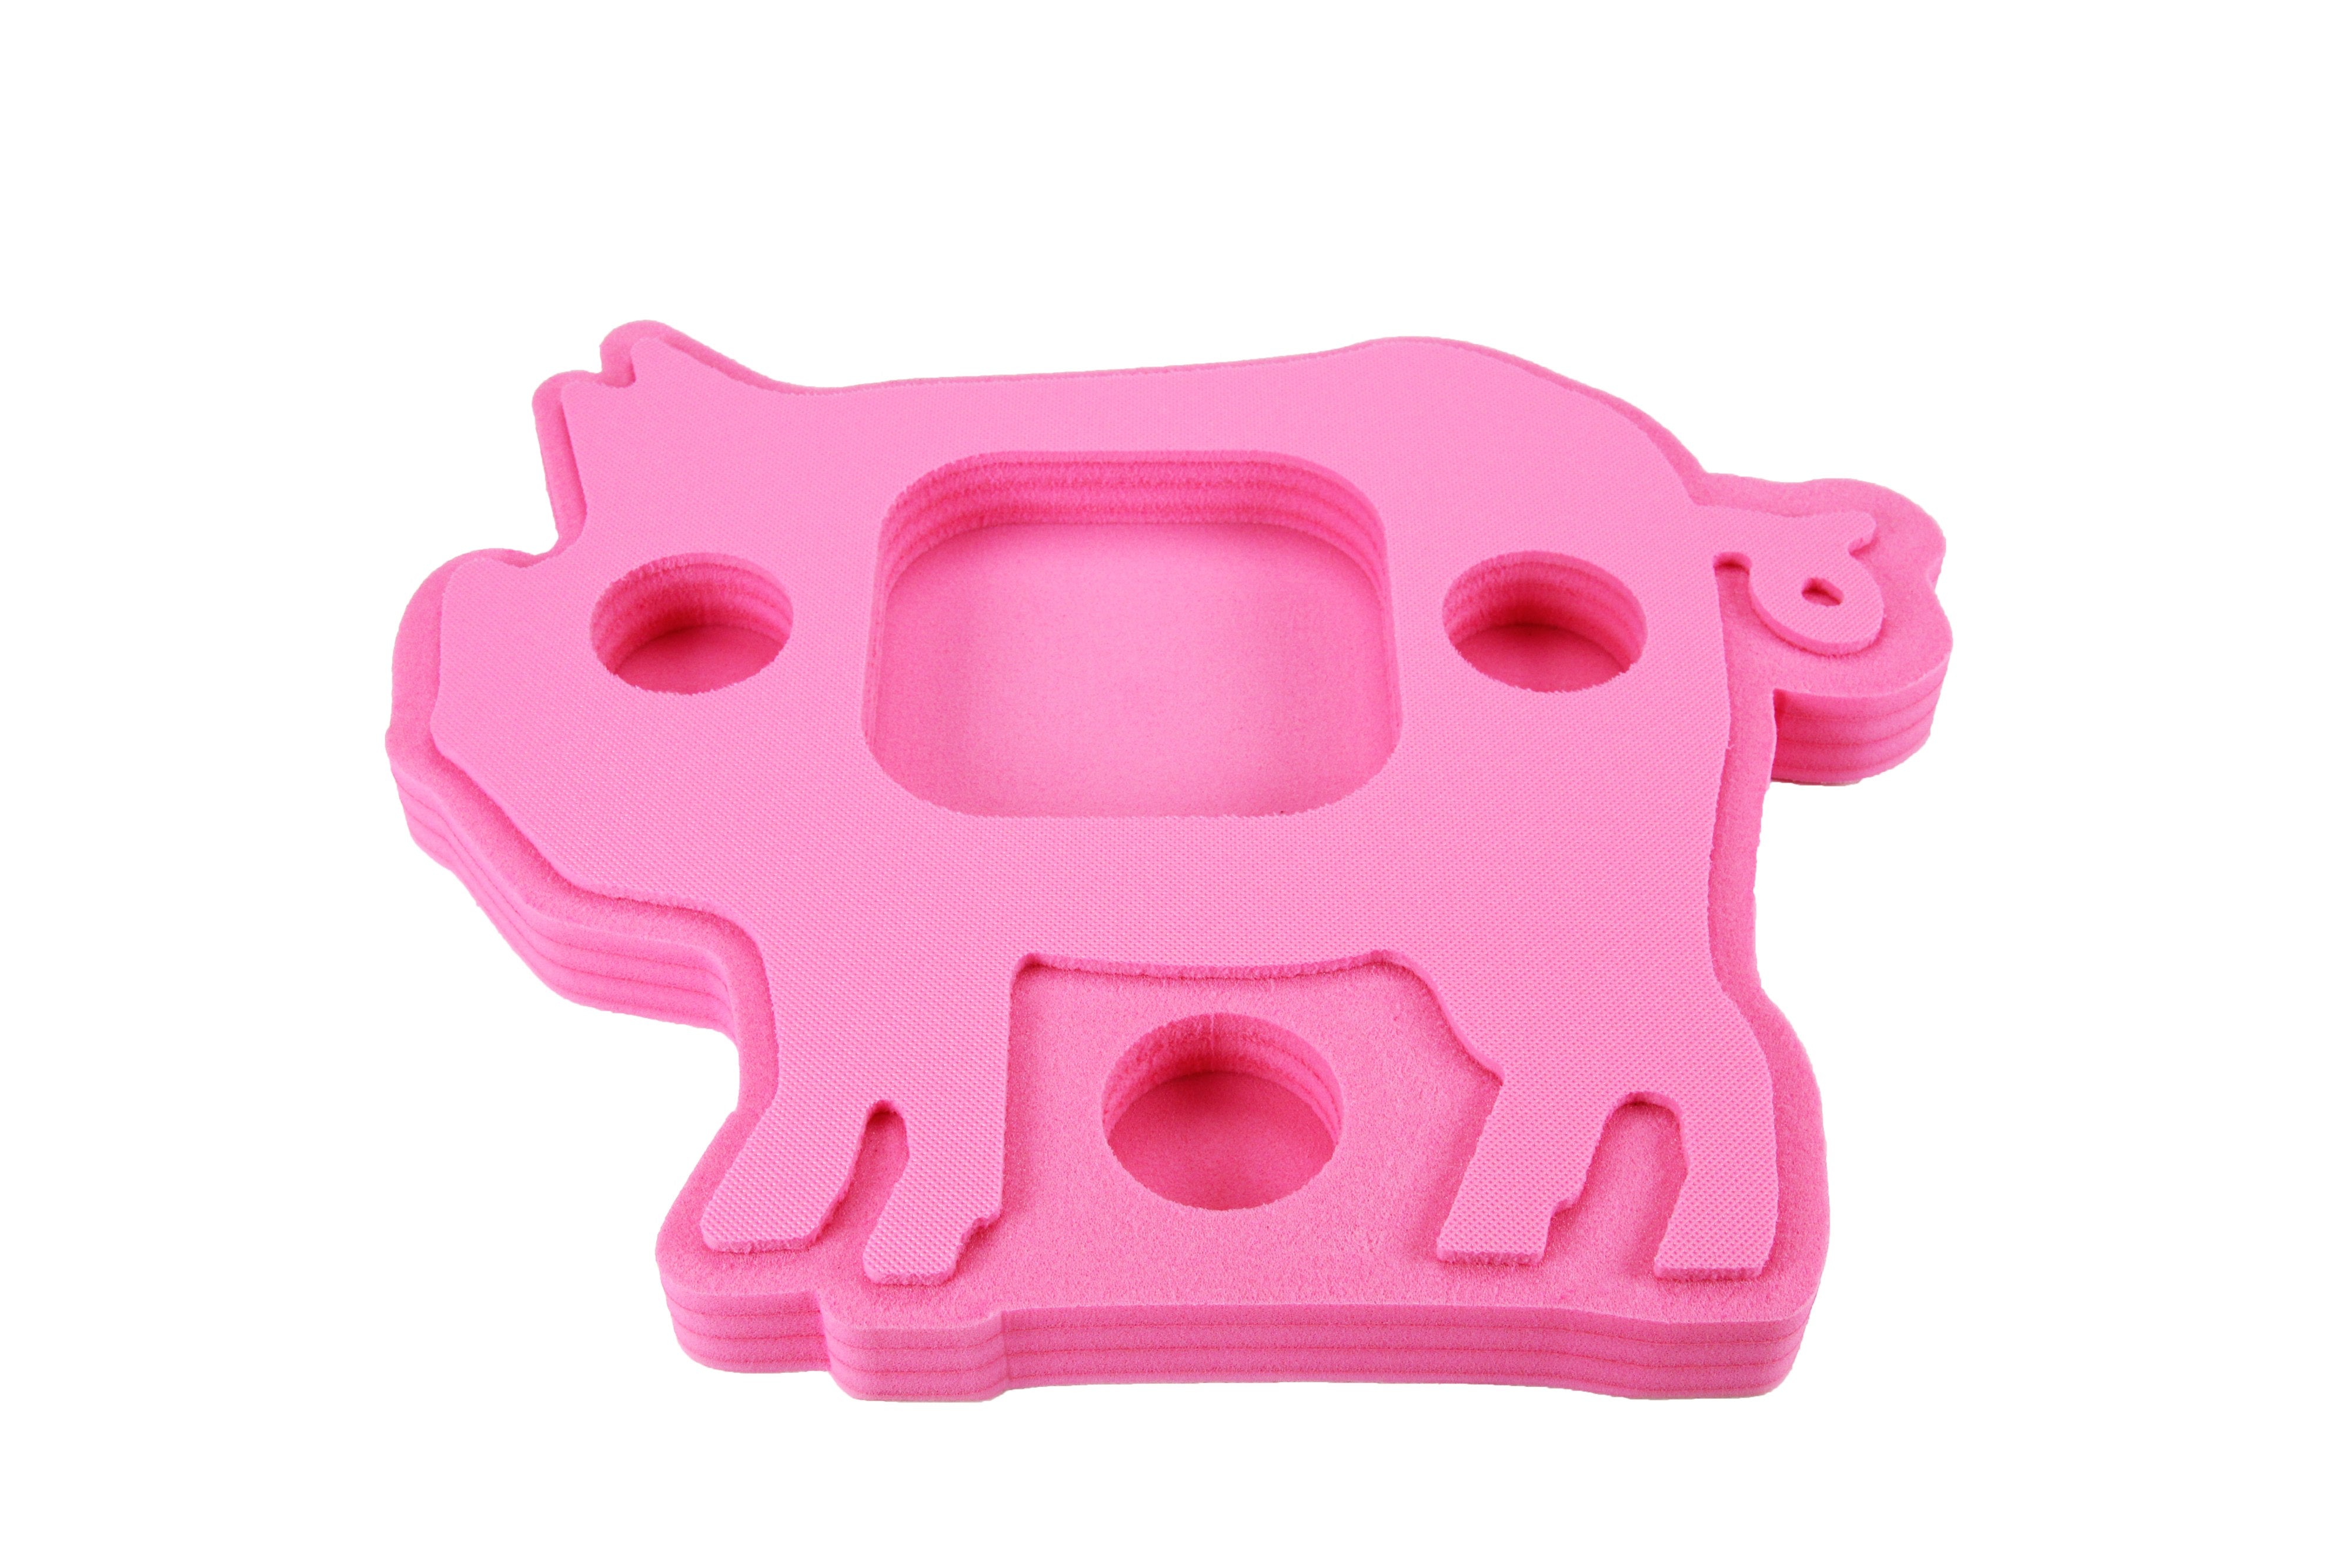 Floating Pig Shape Drink Holder Refreshment Table Tray PoolBeach Party Float Lounge Durable Foam 4 Compartment UV Resistant Cup Holders 22.9 Inches